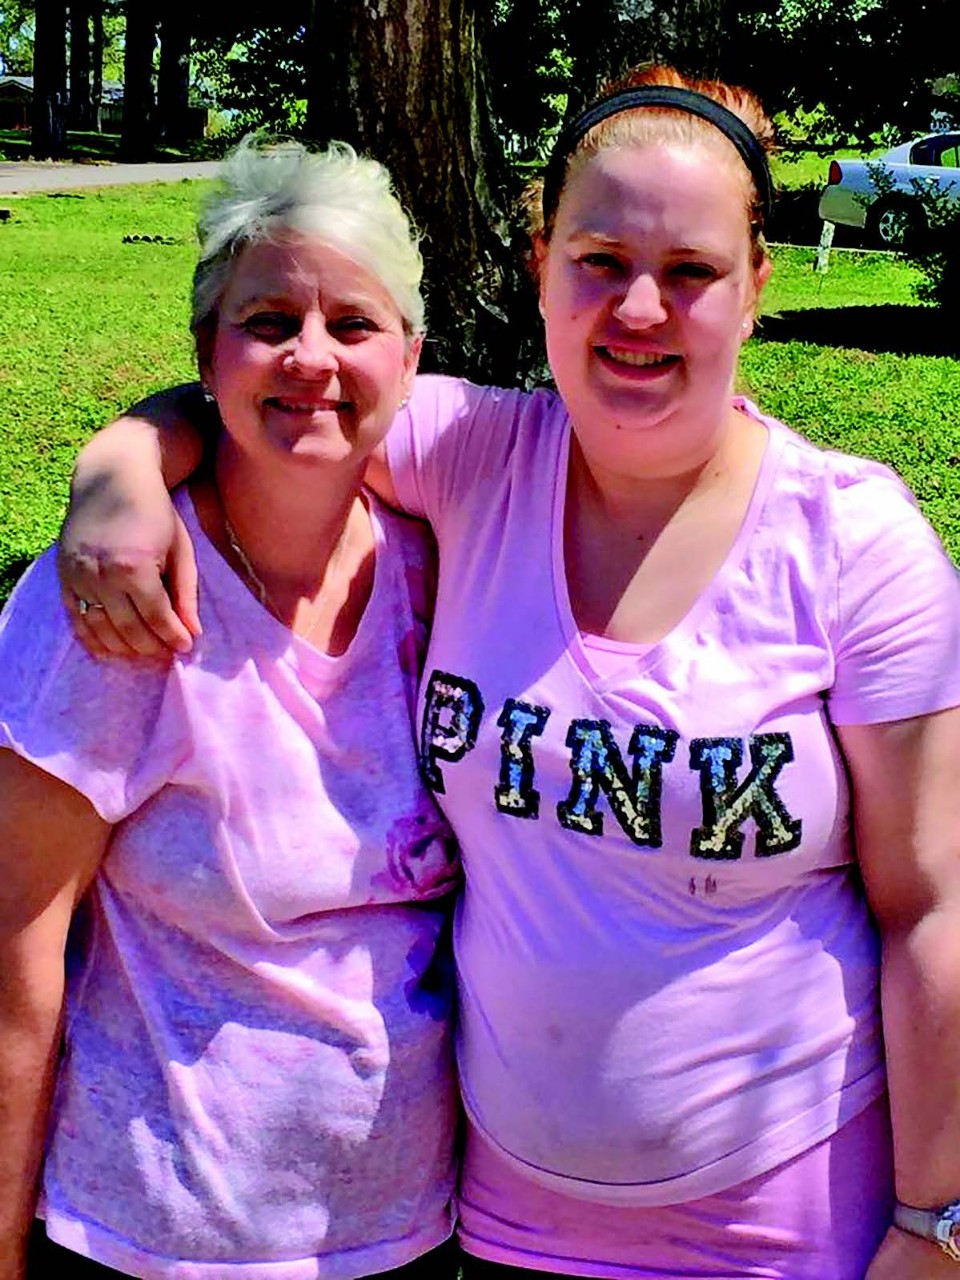 a photo of the author, Sheila Carson, with her daughter, Sarah. They are both smiling, holding each other and wearing bright pink t-shirts.